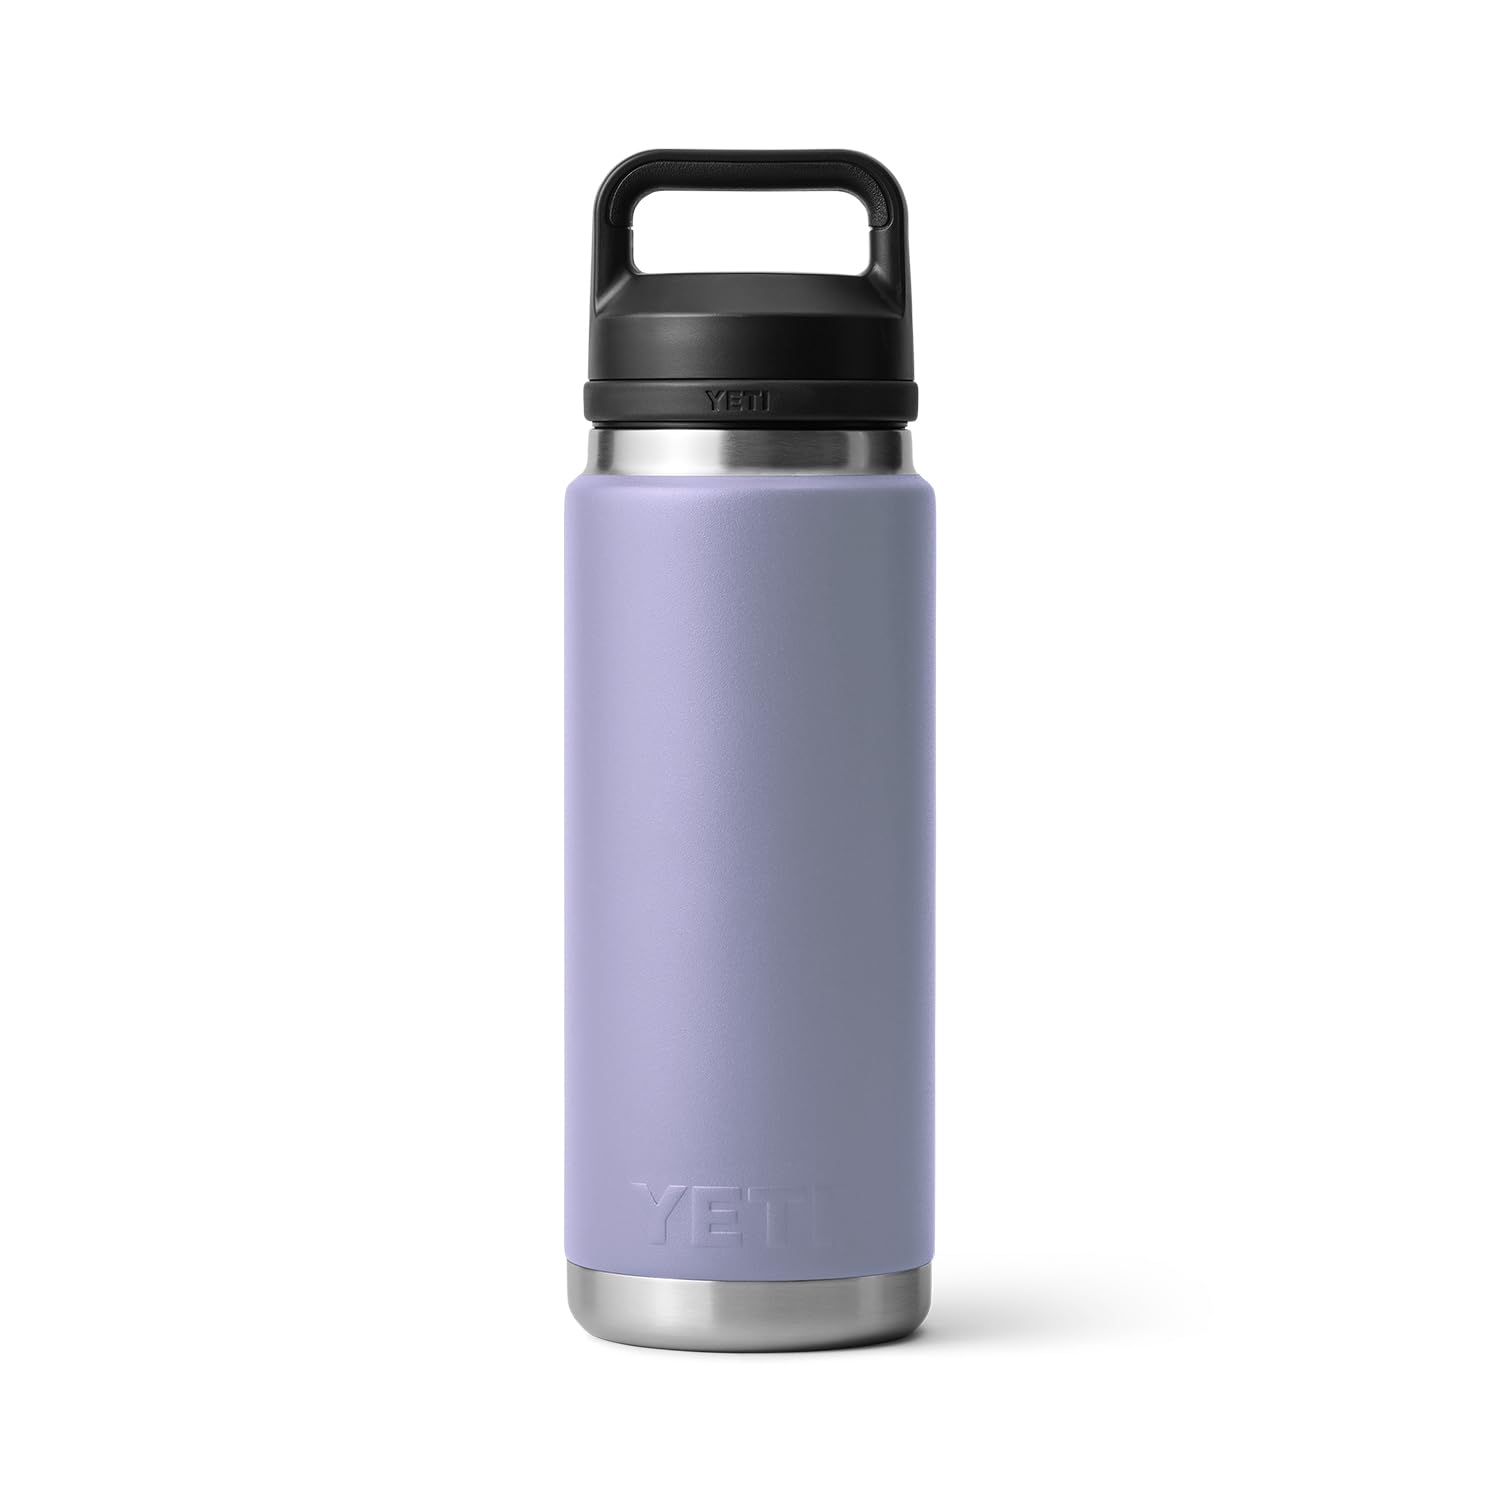 YETI Rambler 26 oz Bottle, Vacuum Insulated, Stainless Steel with Chug Cap, Cosmic Lilac